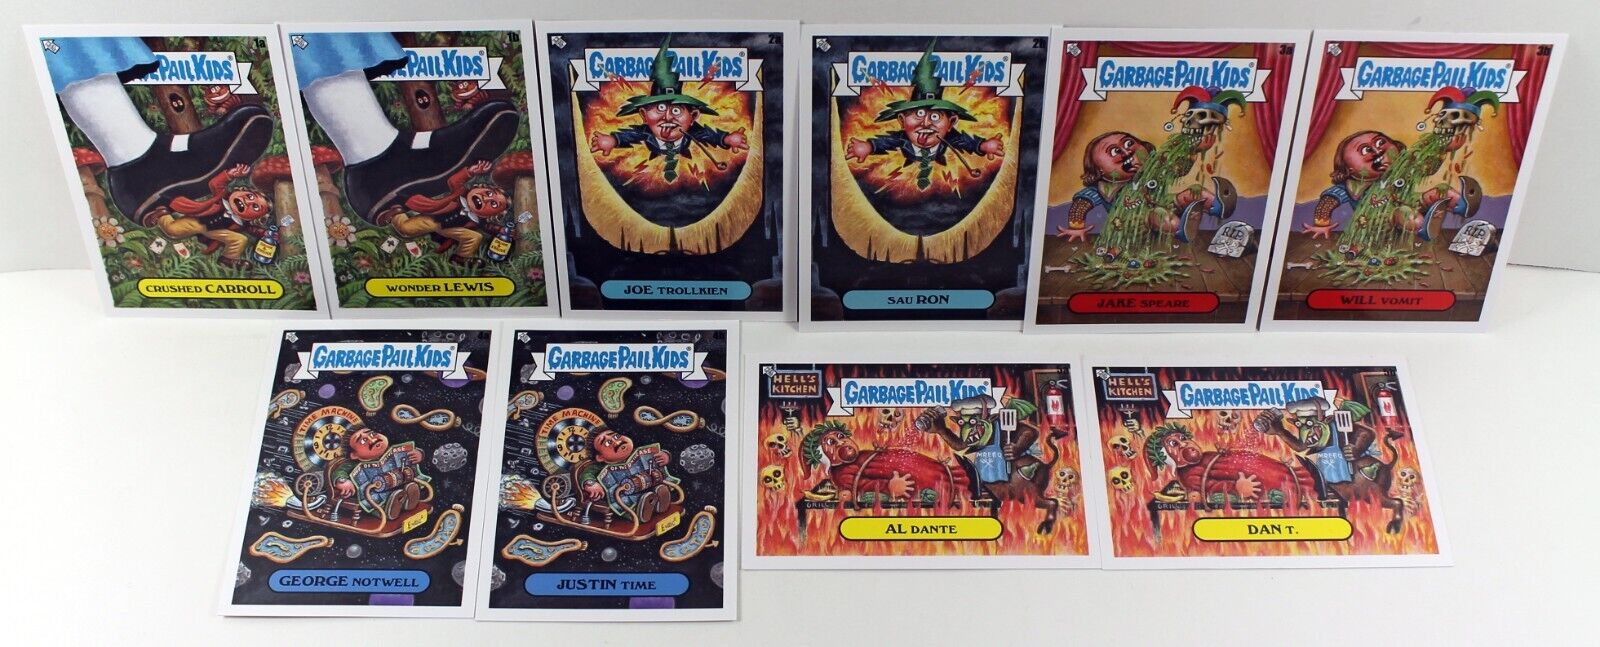 Garbage Pail Kids Book Worms Authors of Their Own Misfortune 10-Card Insert Set